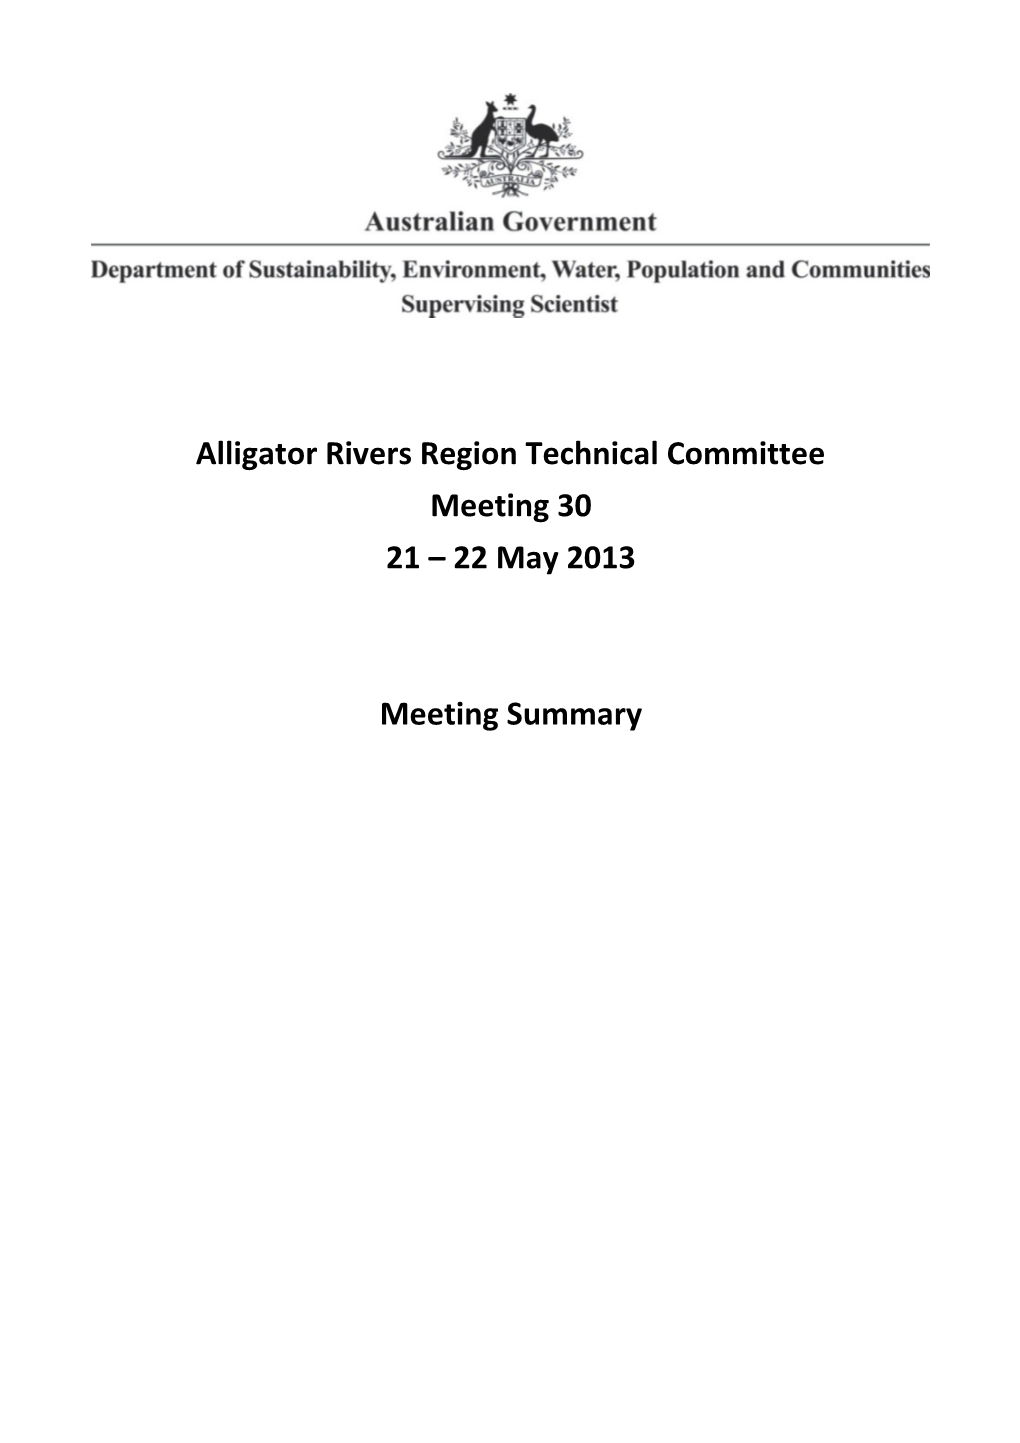 Alligator Rivers Region Technical Committee Meeting 30 21 22 May 2013 Meeting Summary